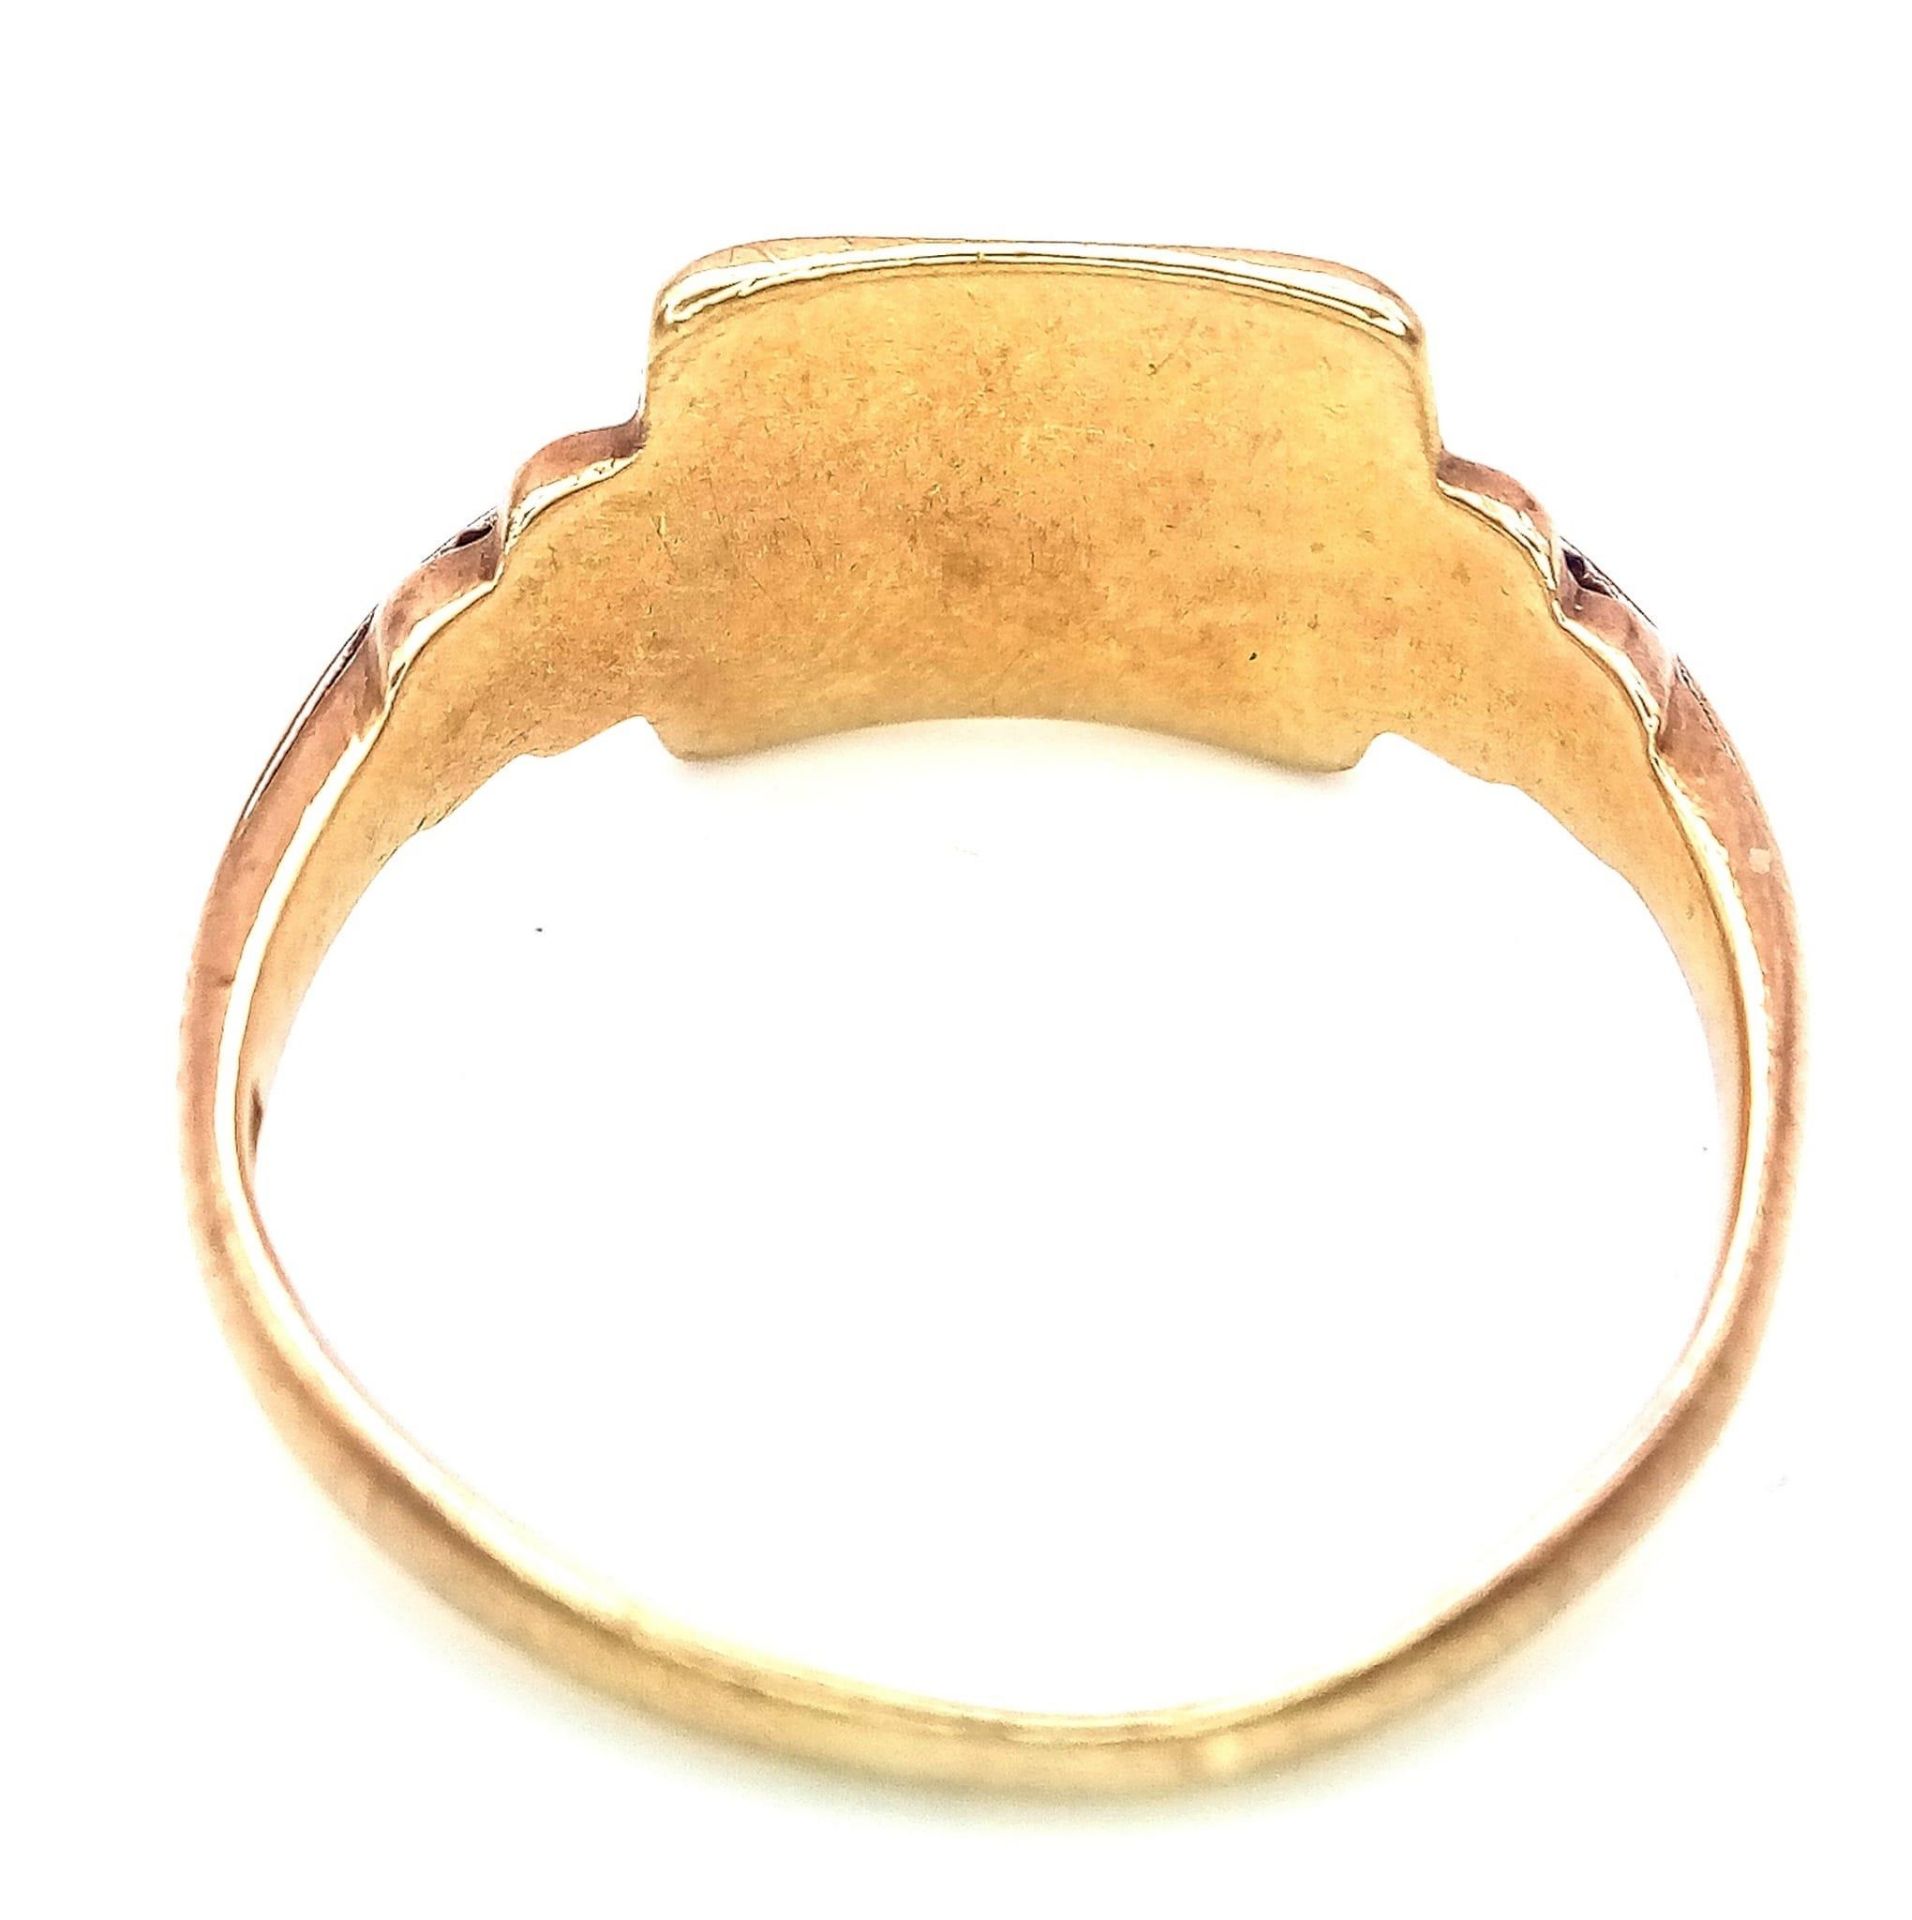 A Vintage 9K Yellow Gold Signet Ring. Size S. 3.7g weight. - Image 4 of 6